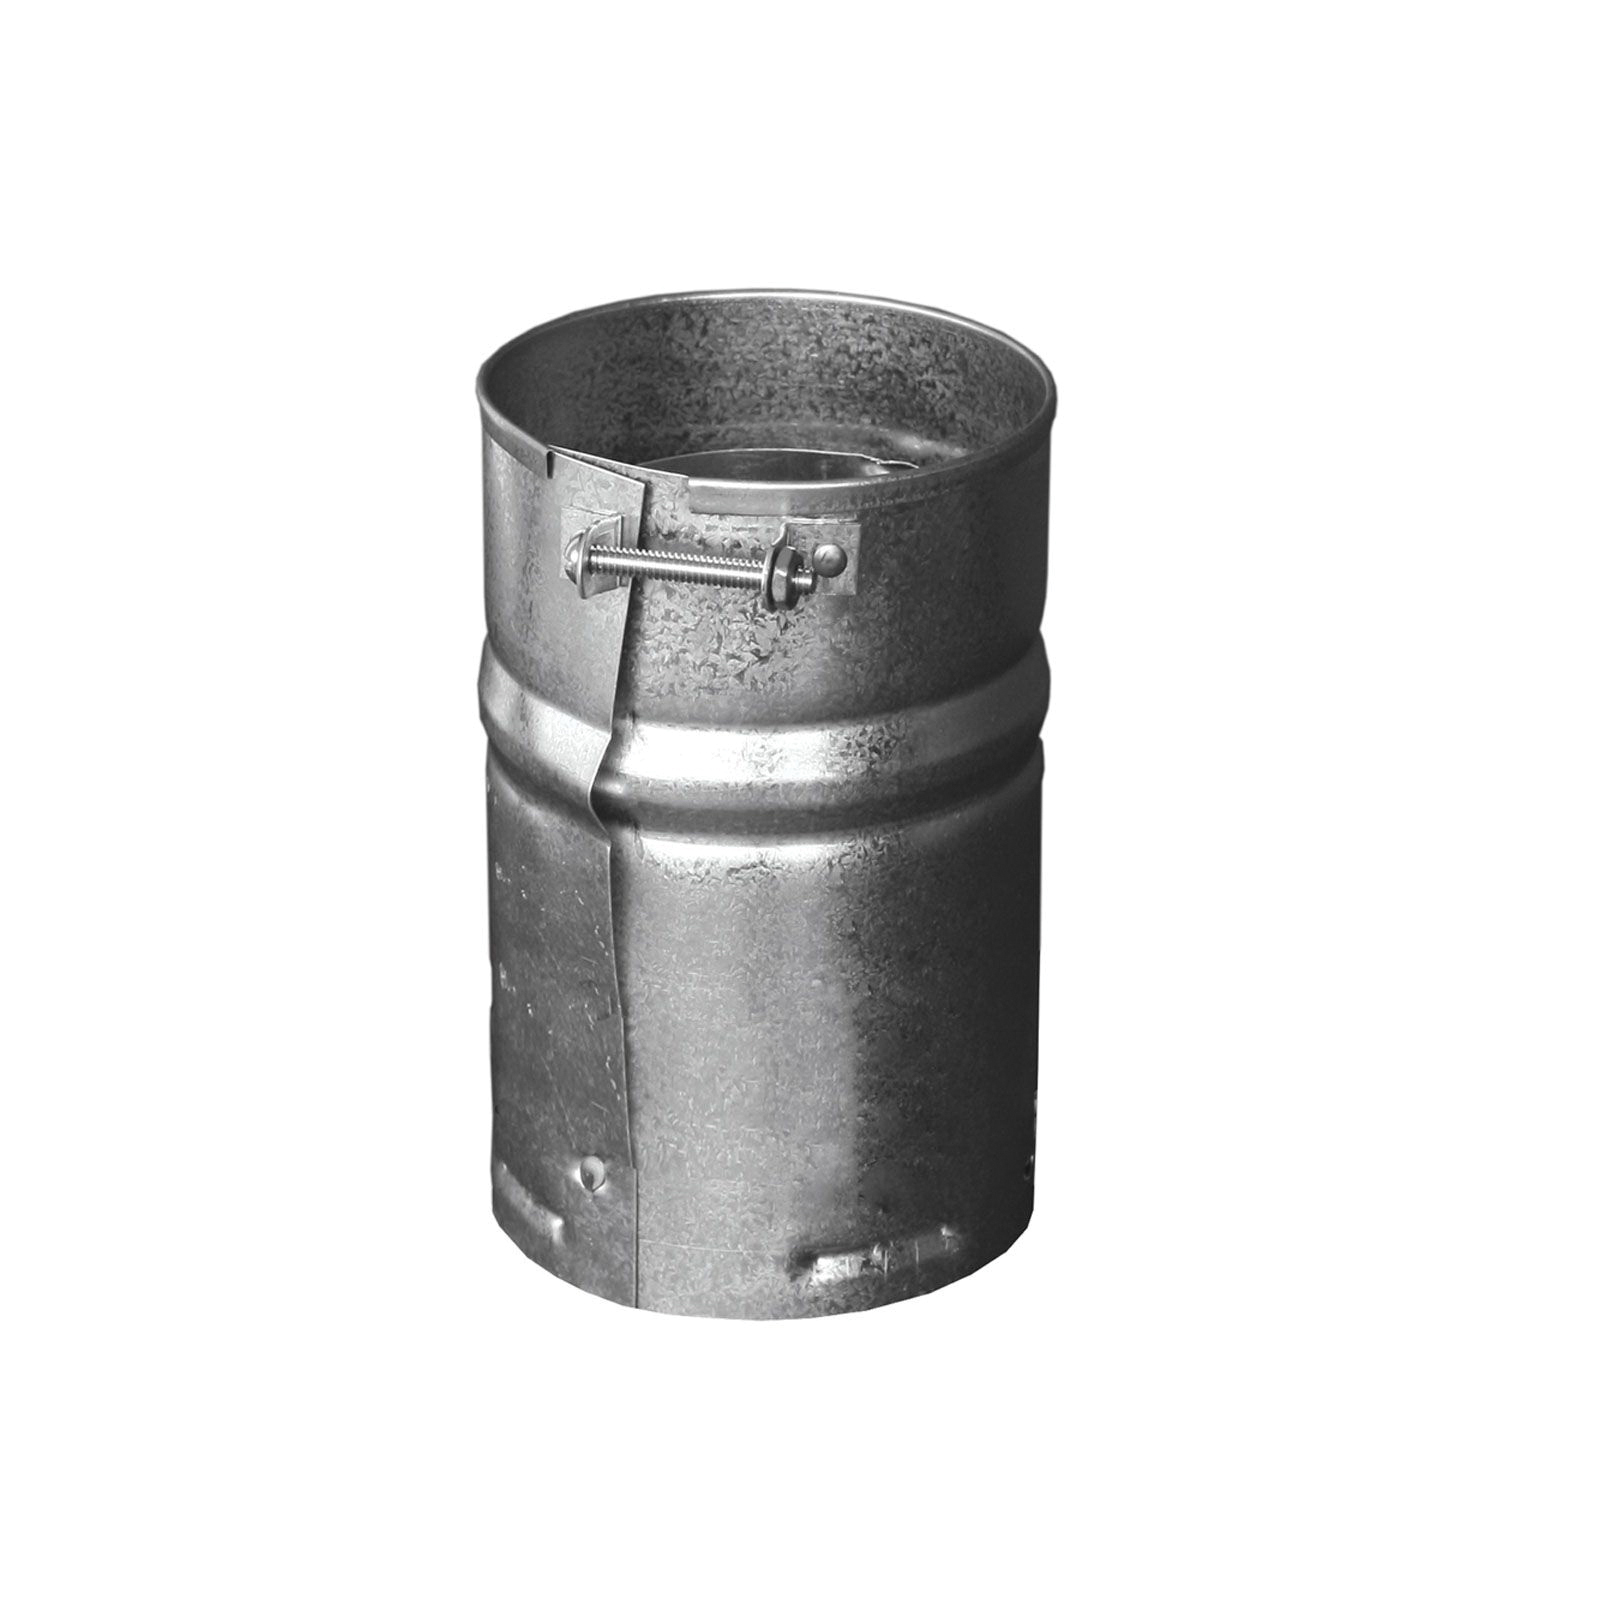 DuraVent® 4GVAF Female Adapter, 4 in, 0.012 in Aluminum Inner and 0.018 in Galvanized Steel Outer Wall